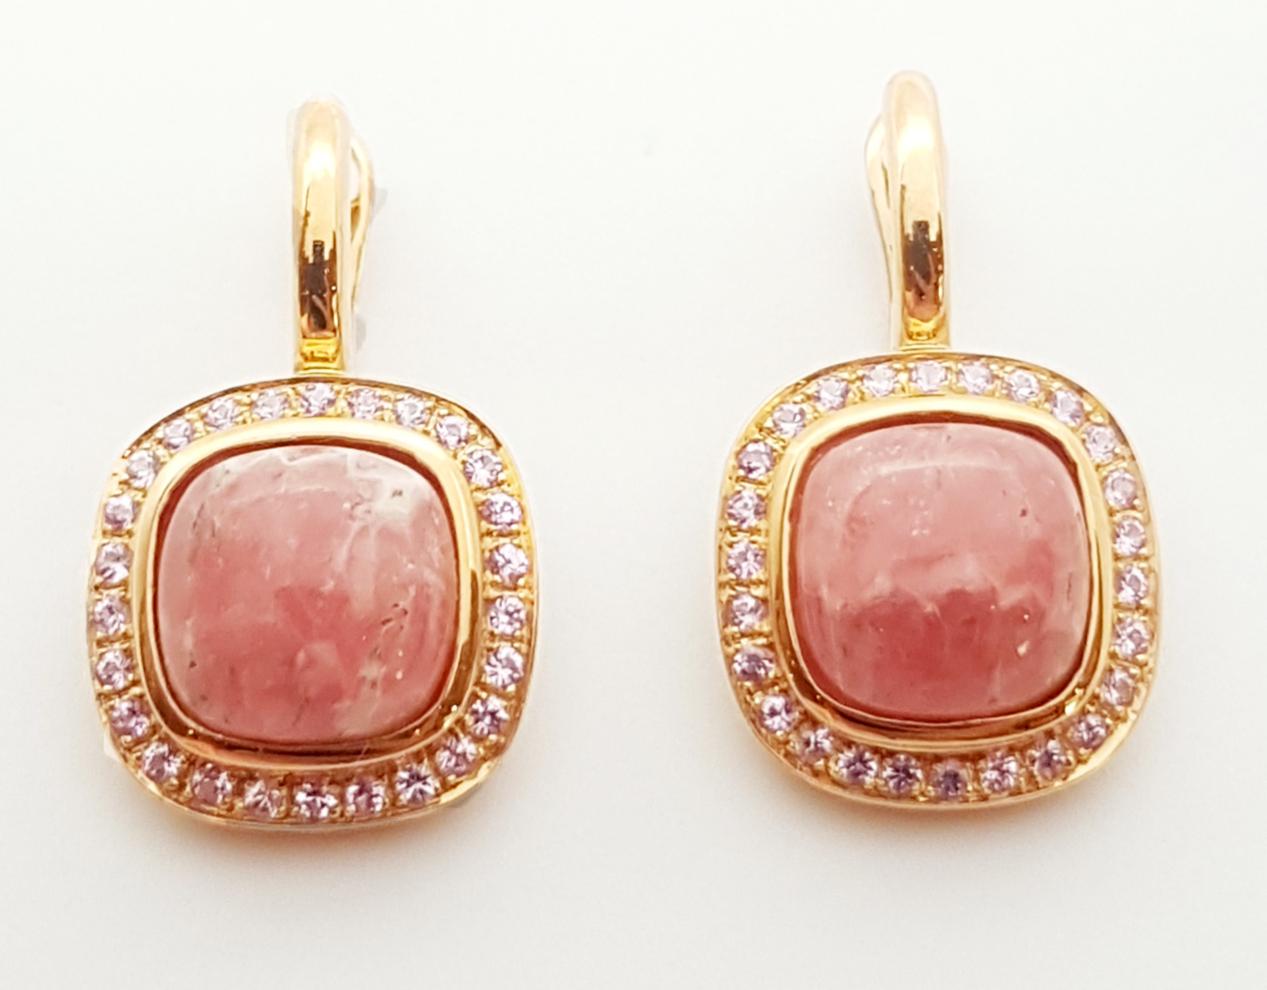 Rhodochrosite 14.47 carats with Pink Sapphire 0.76 carat Earring set in 18K Rose Gold Settings

Width: 1.5 cm 
Length: 2.5 cm
Total Weight: 11.13 grams

